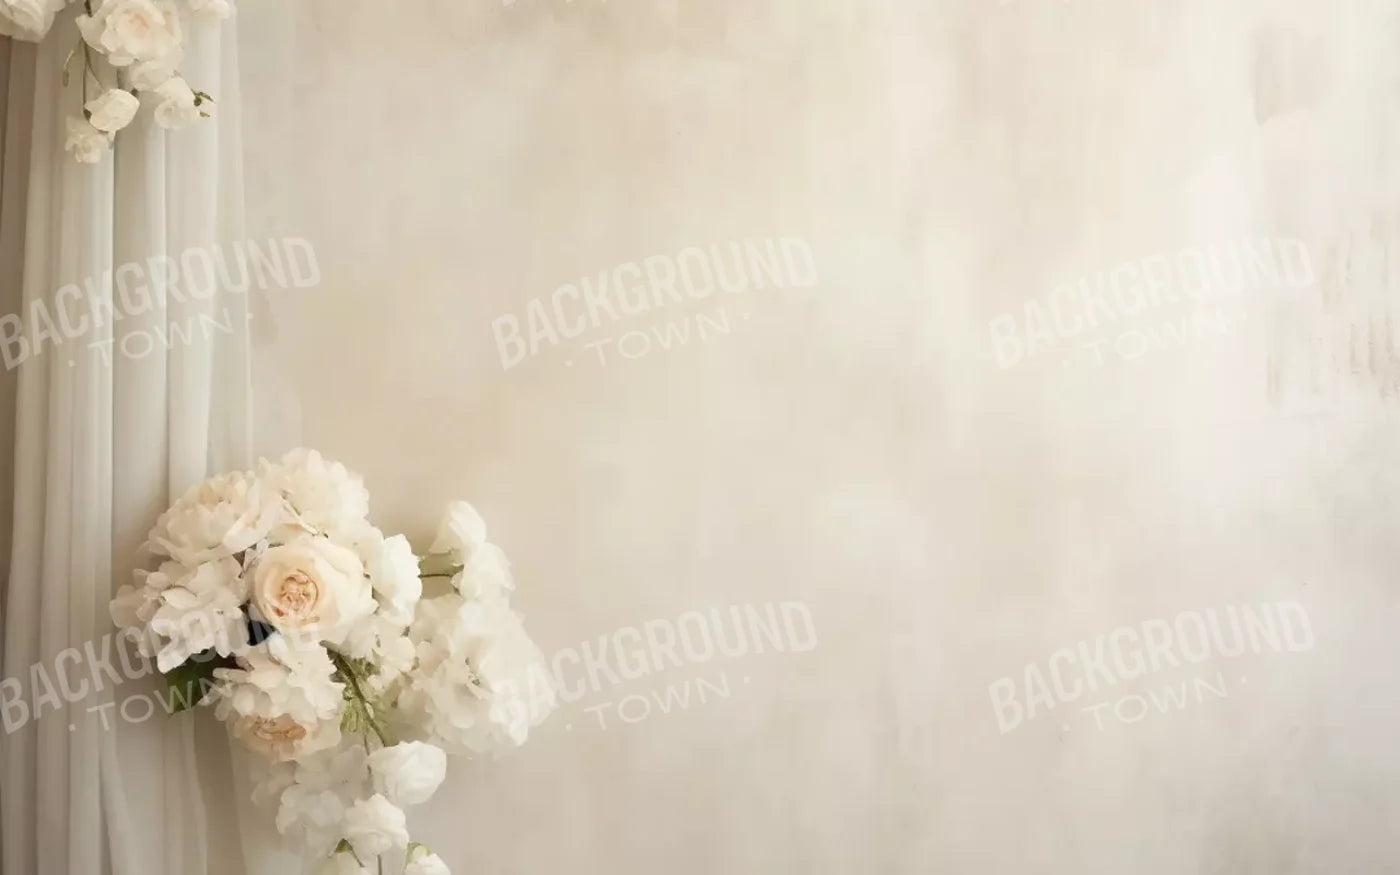 Plaster Wall With Florals 8’X5’ Ultracloth (96 X 60 Inch) Backdrop